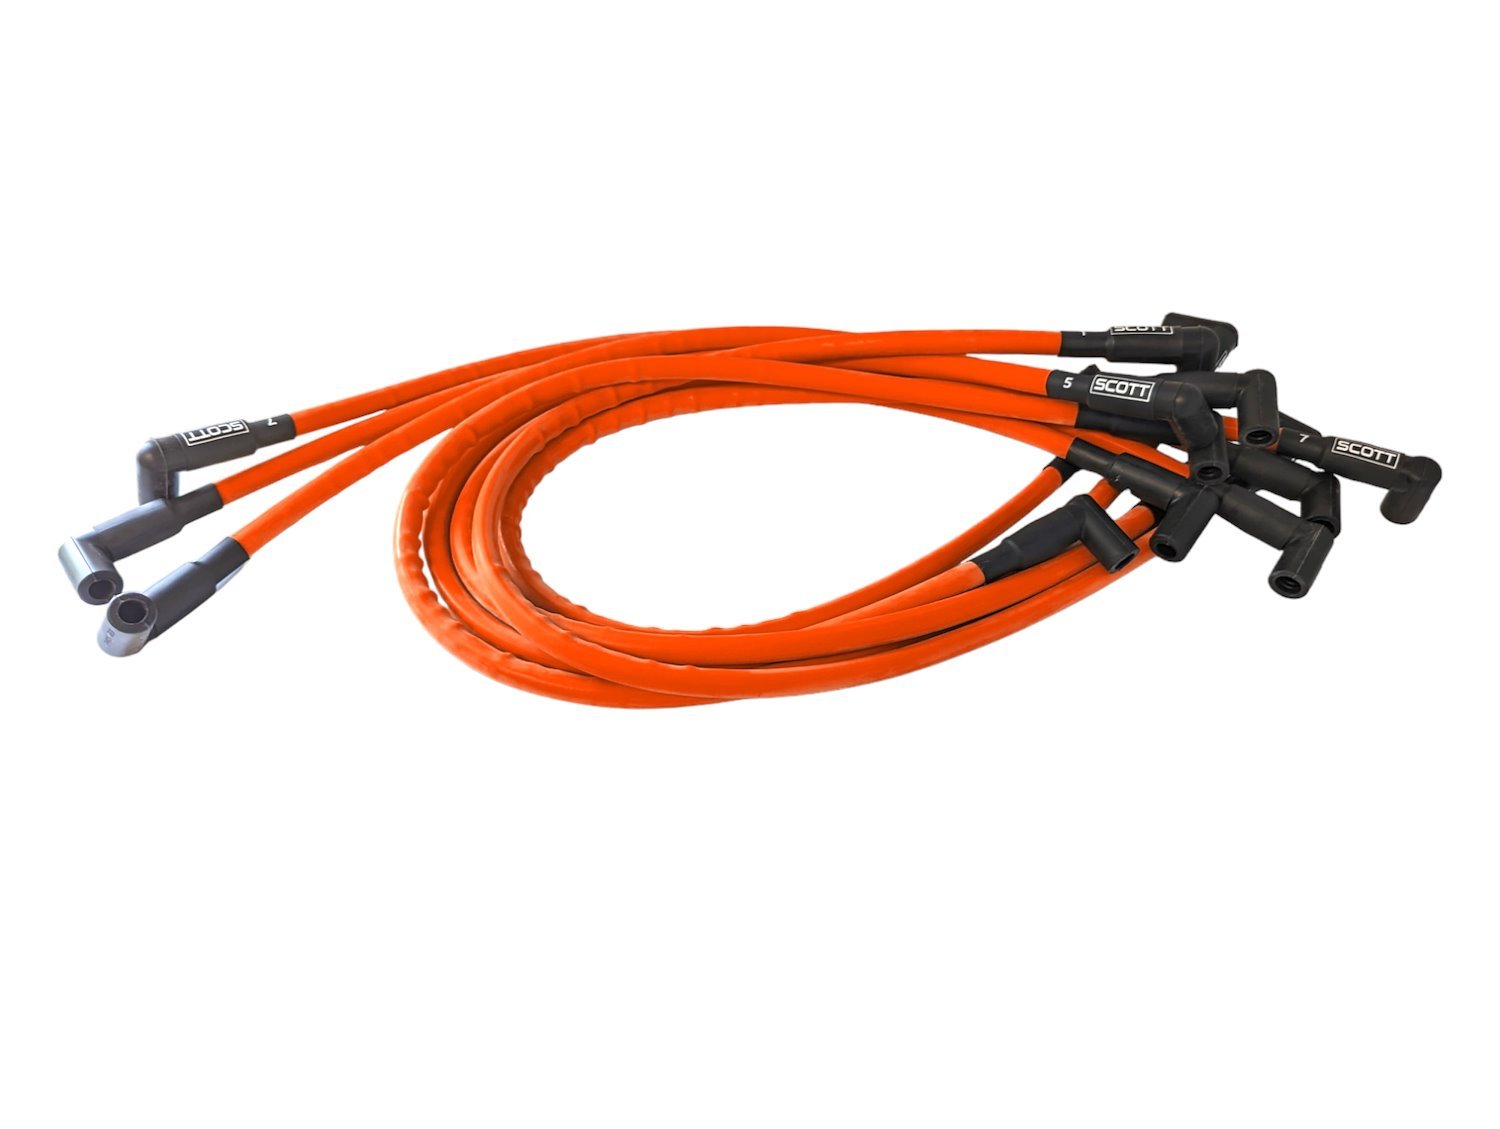 SPW-CH-437-9 High-Performance Silicone-Sleeved Spark Plug Wire Set for Small Block Chevy, Over & Under [Fluorescent Orange]